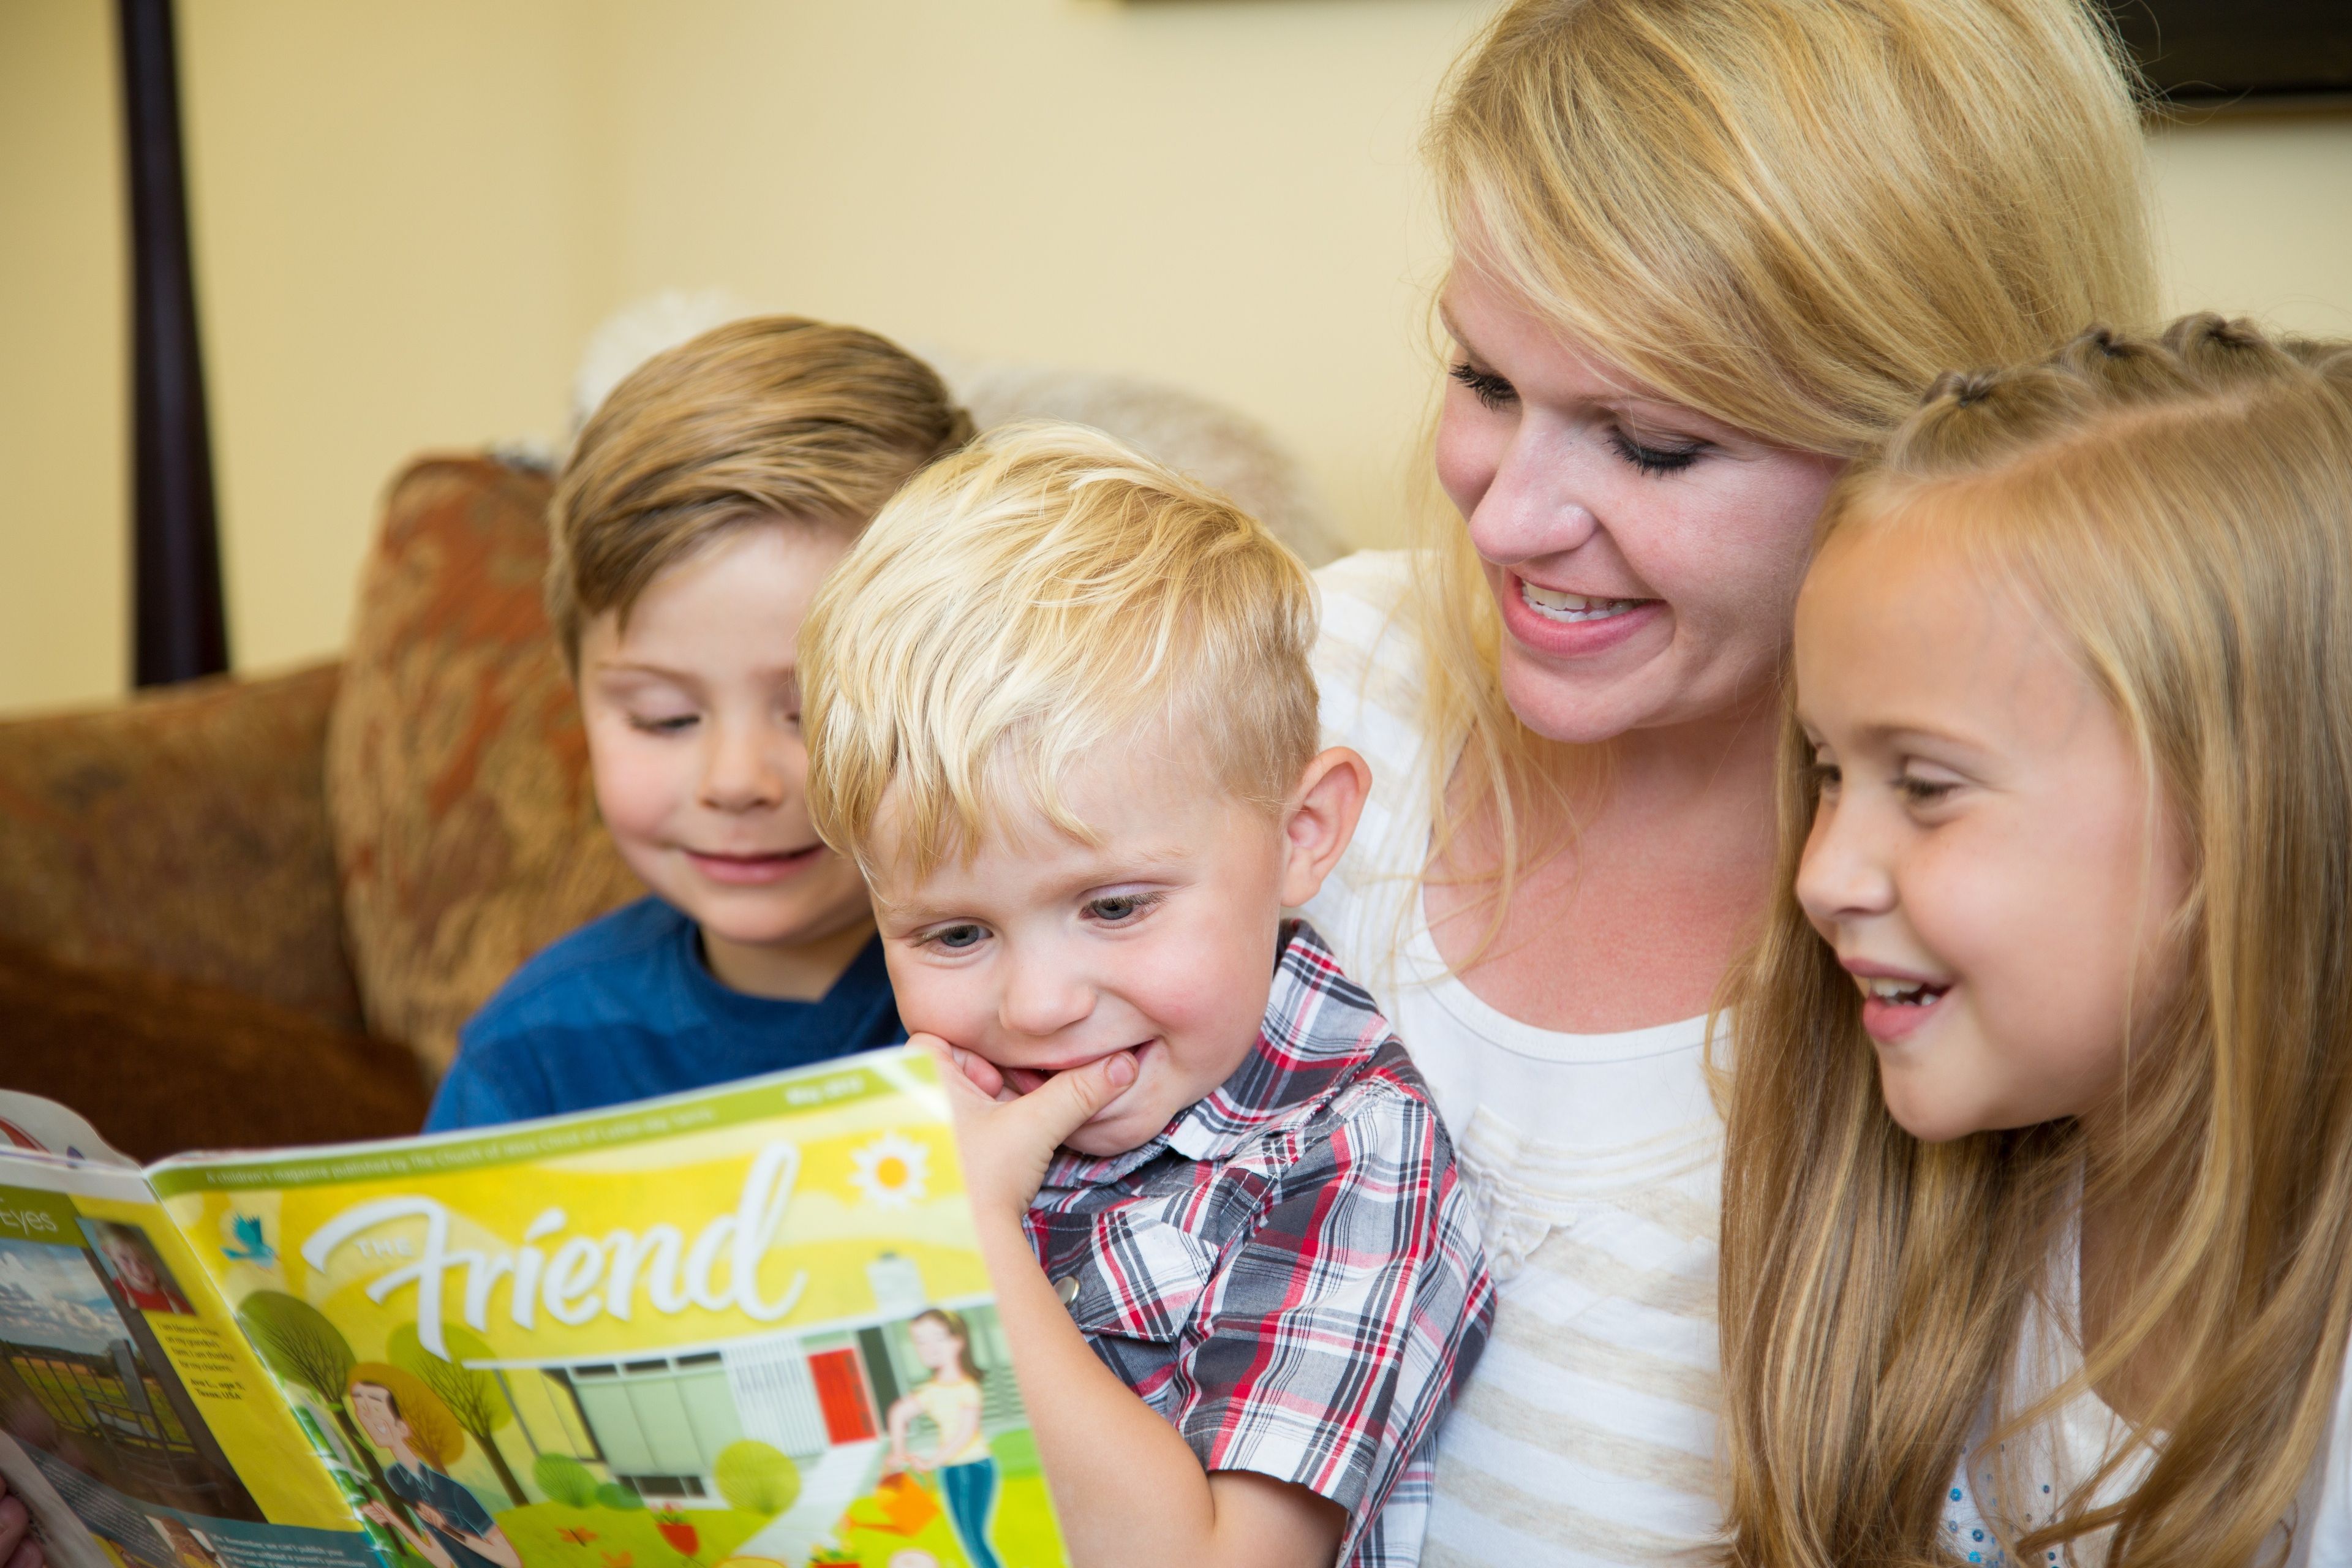 A mother reads the Friend magazine to her children.